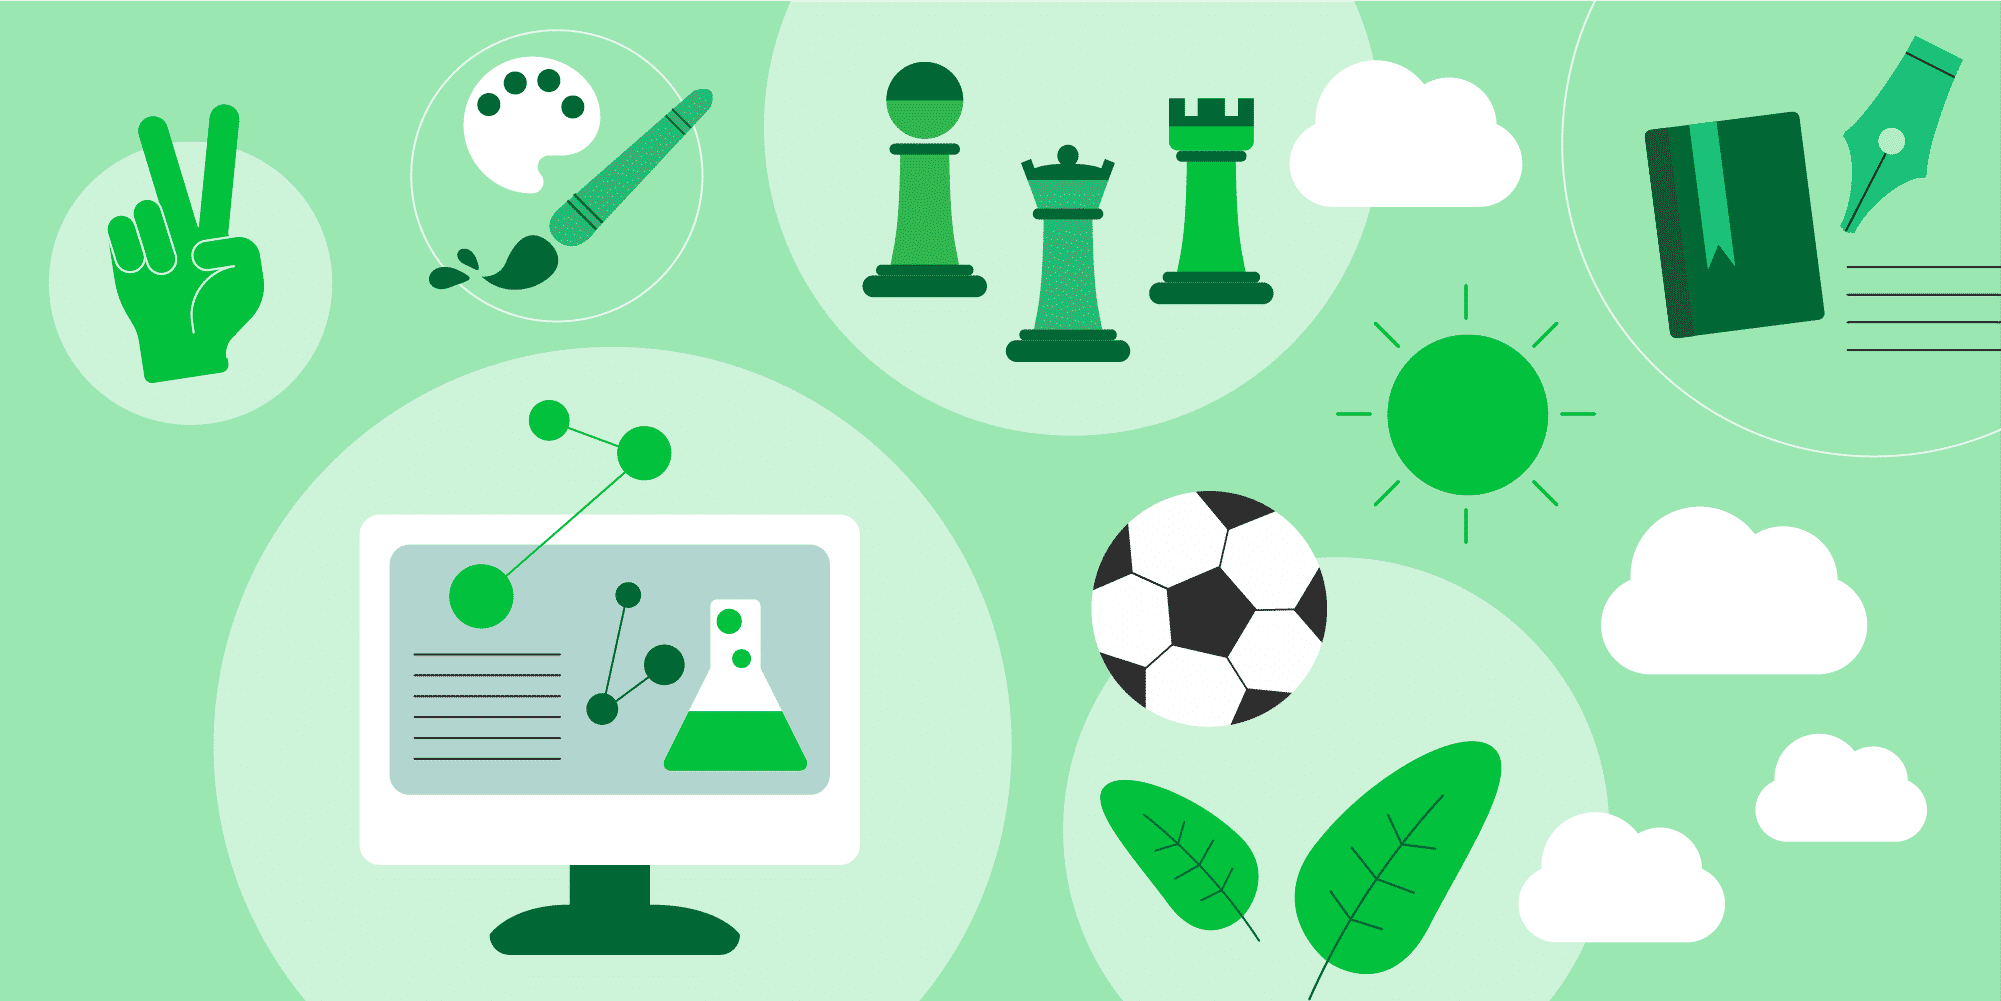 graphic showing numerous hobbies like sports and computers